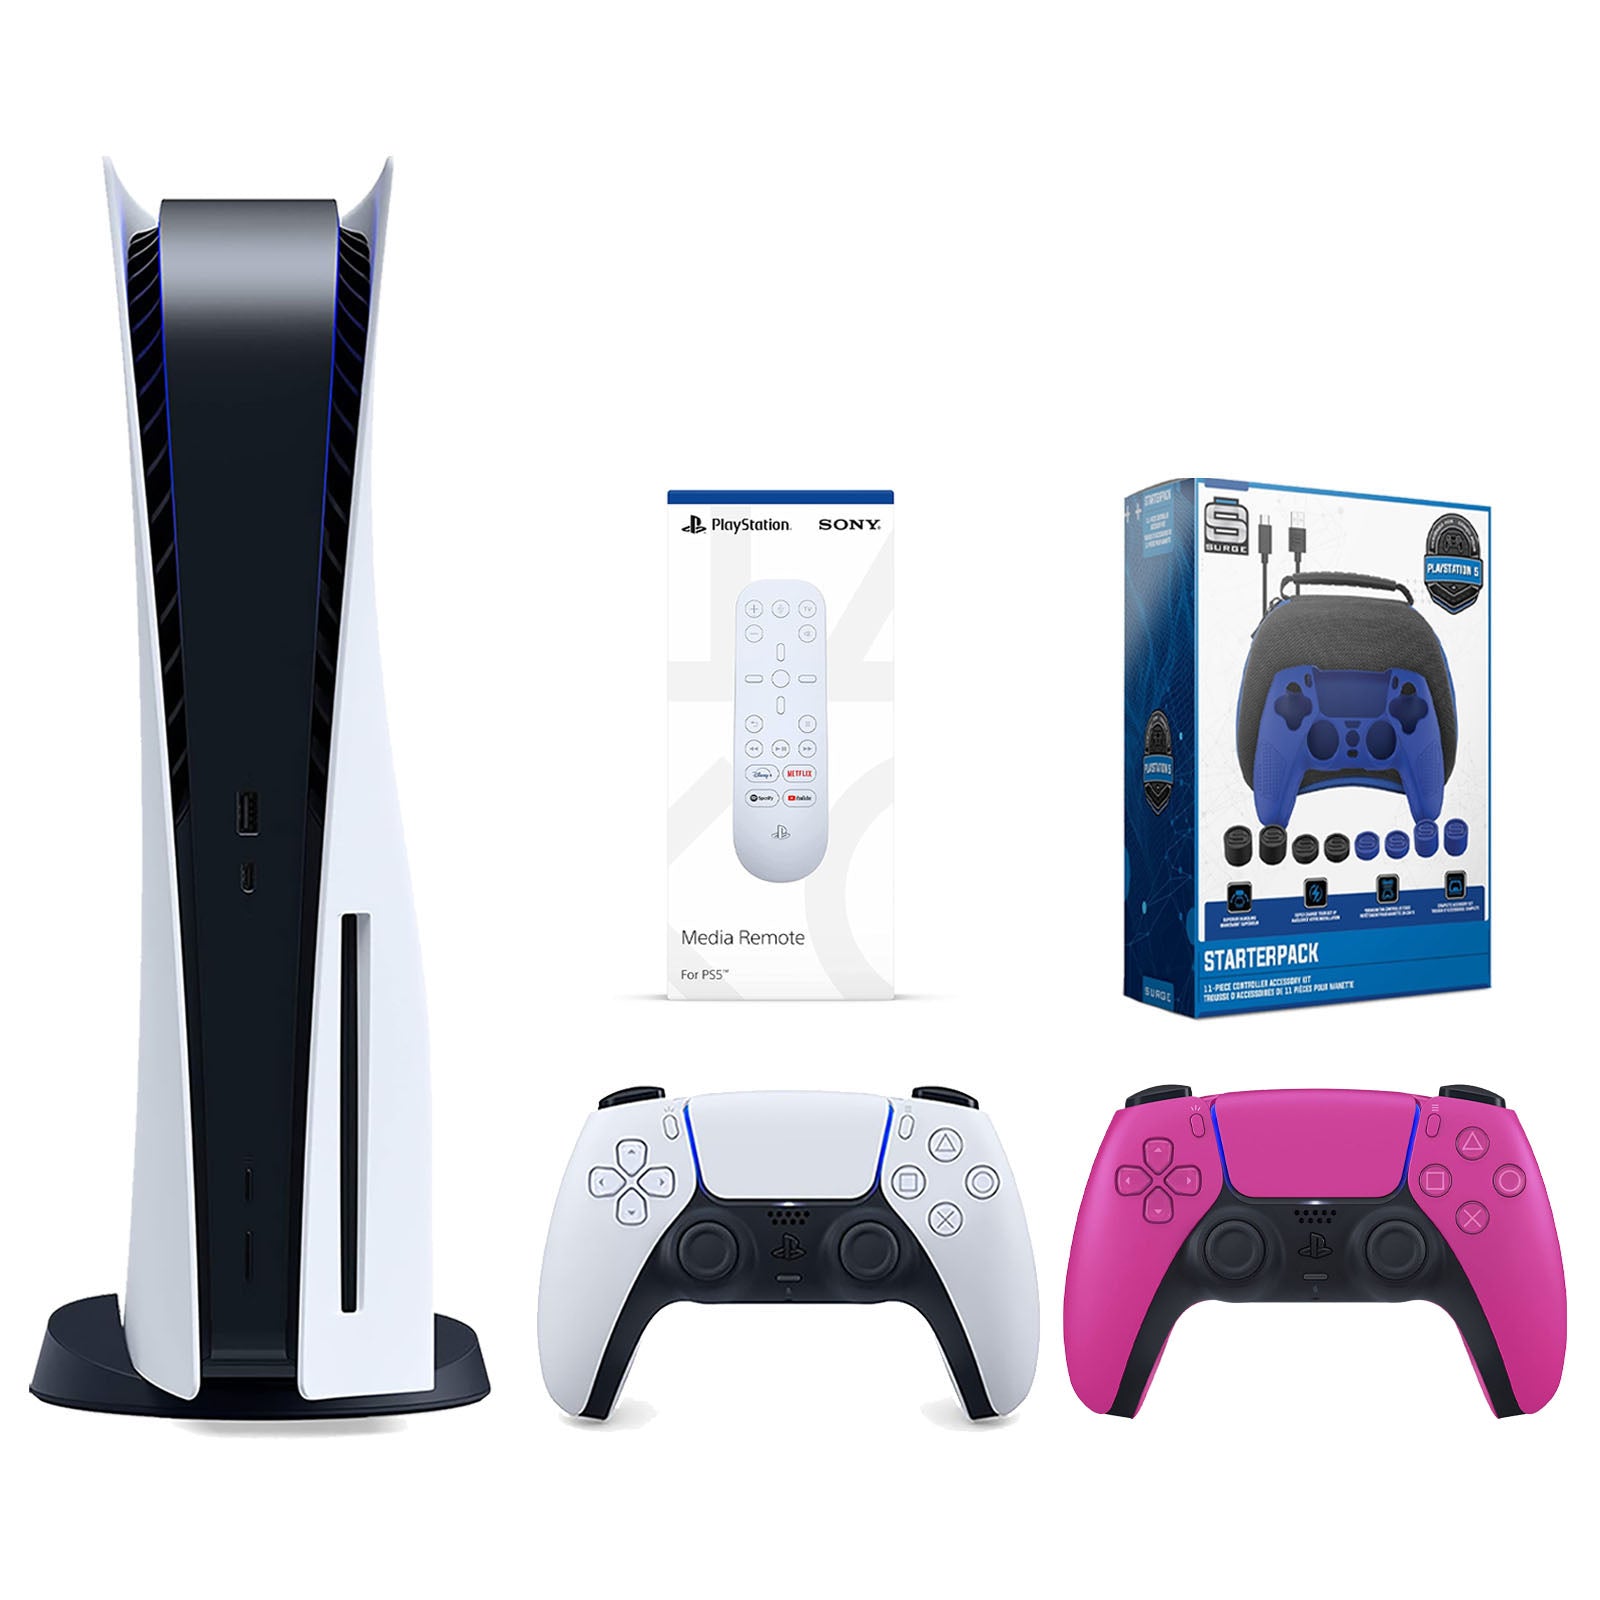 Sony Playstation 5 Disc Version Console with Extra Pink Controller, Media Remote and Surge Pro Gamer Starter Pack 11-Piece Accessory Bundle - Pro-Distributing